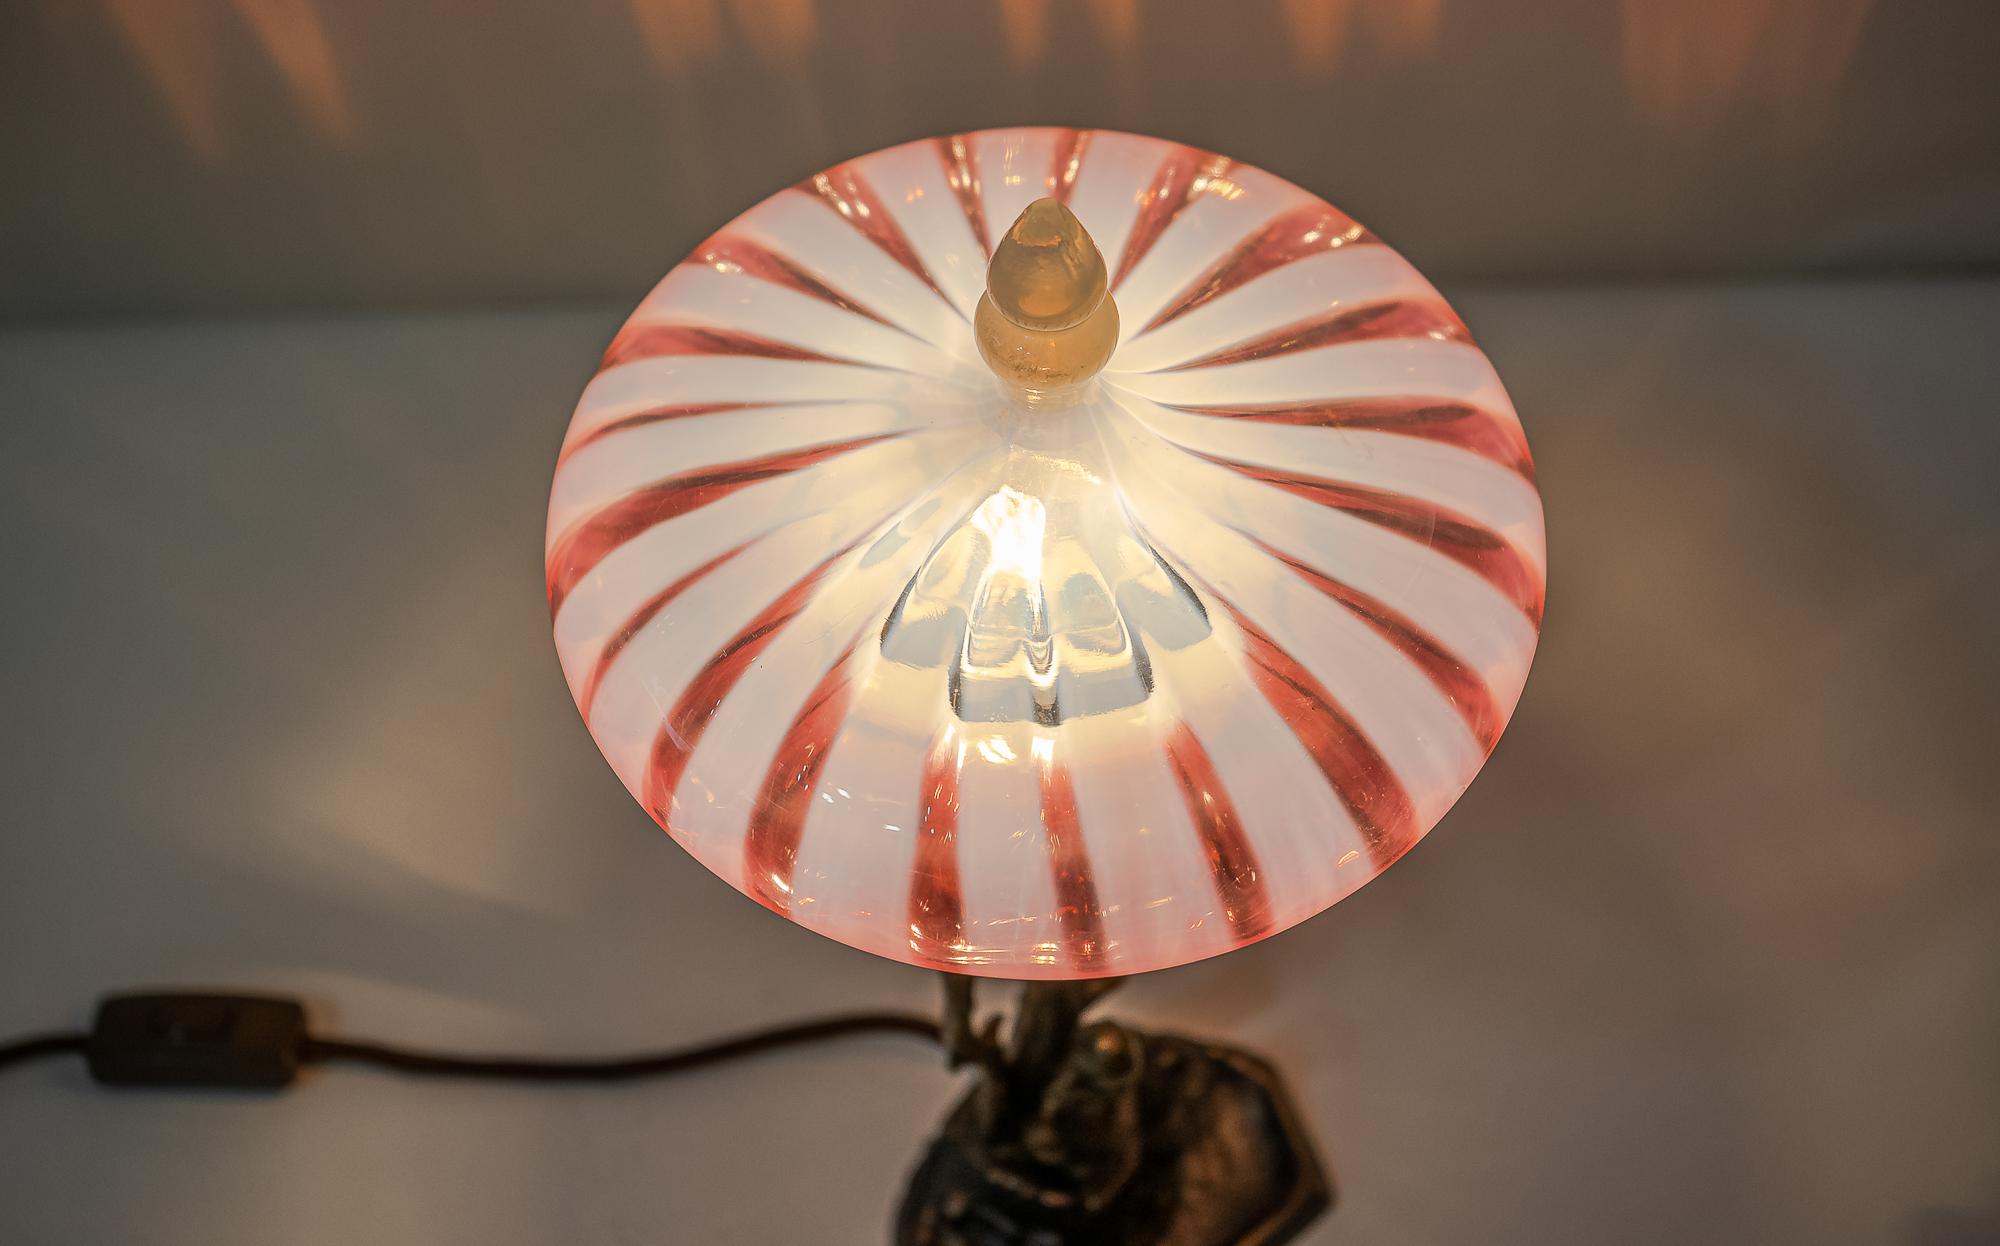 Jugendstil Bronze Table Lamp with Opalin Glass Shade, Vienna, circa 1908s For Sale 10